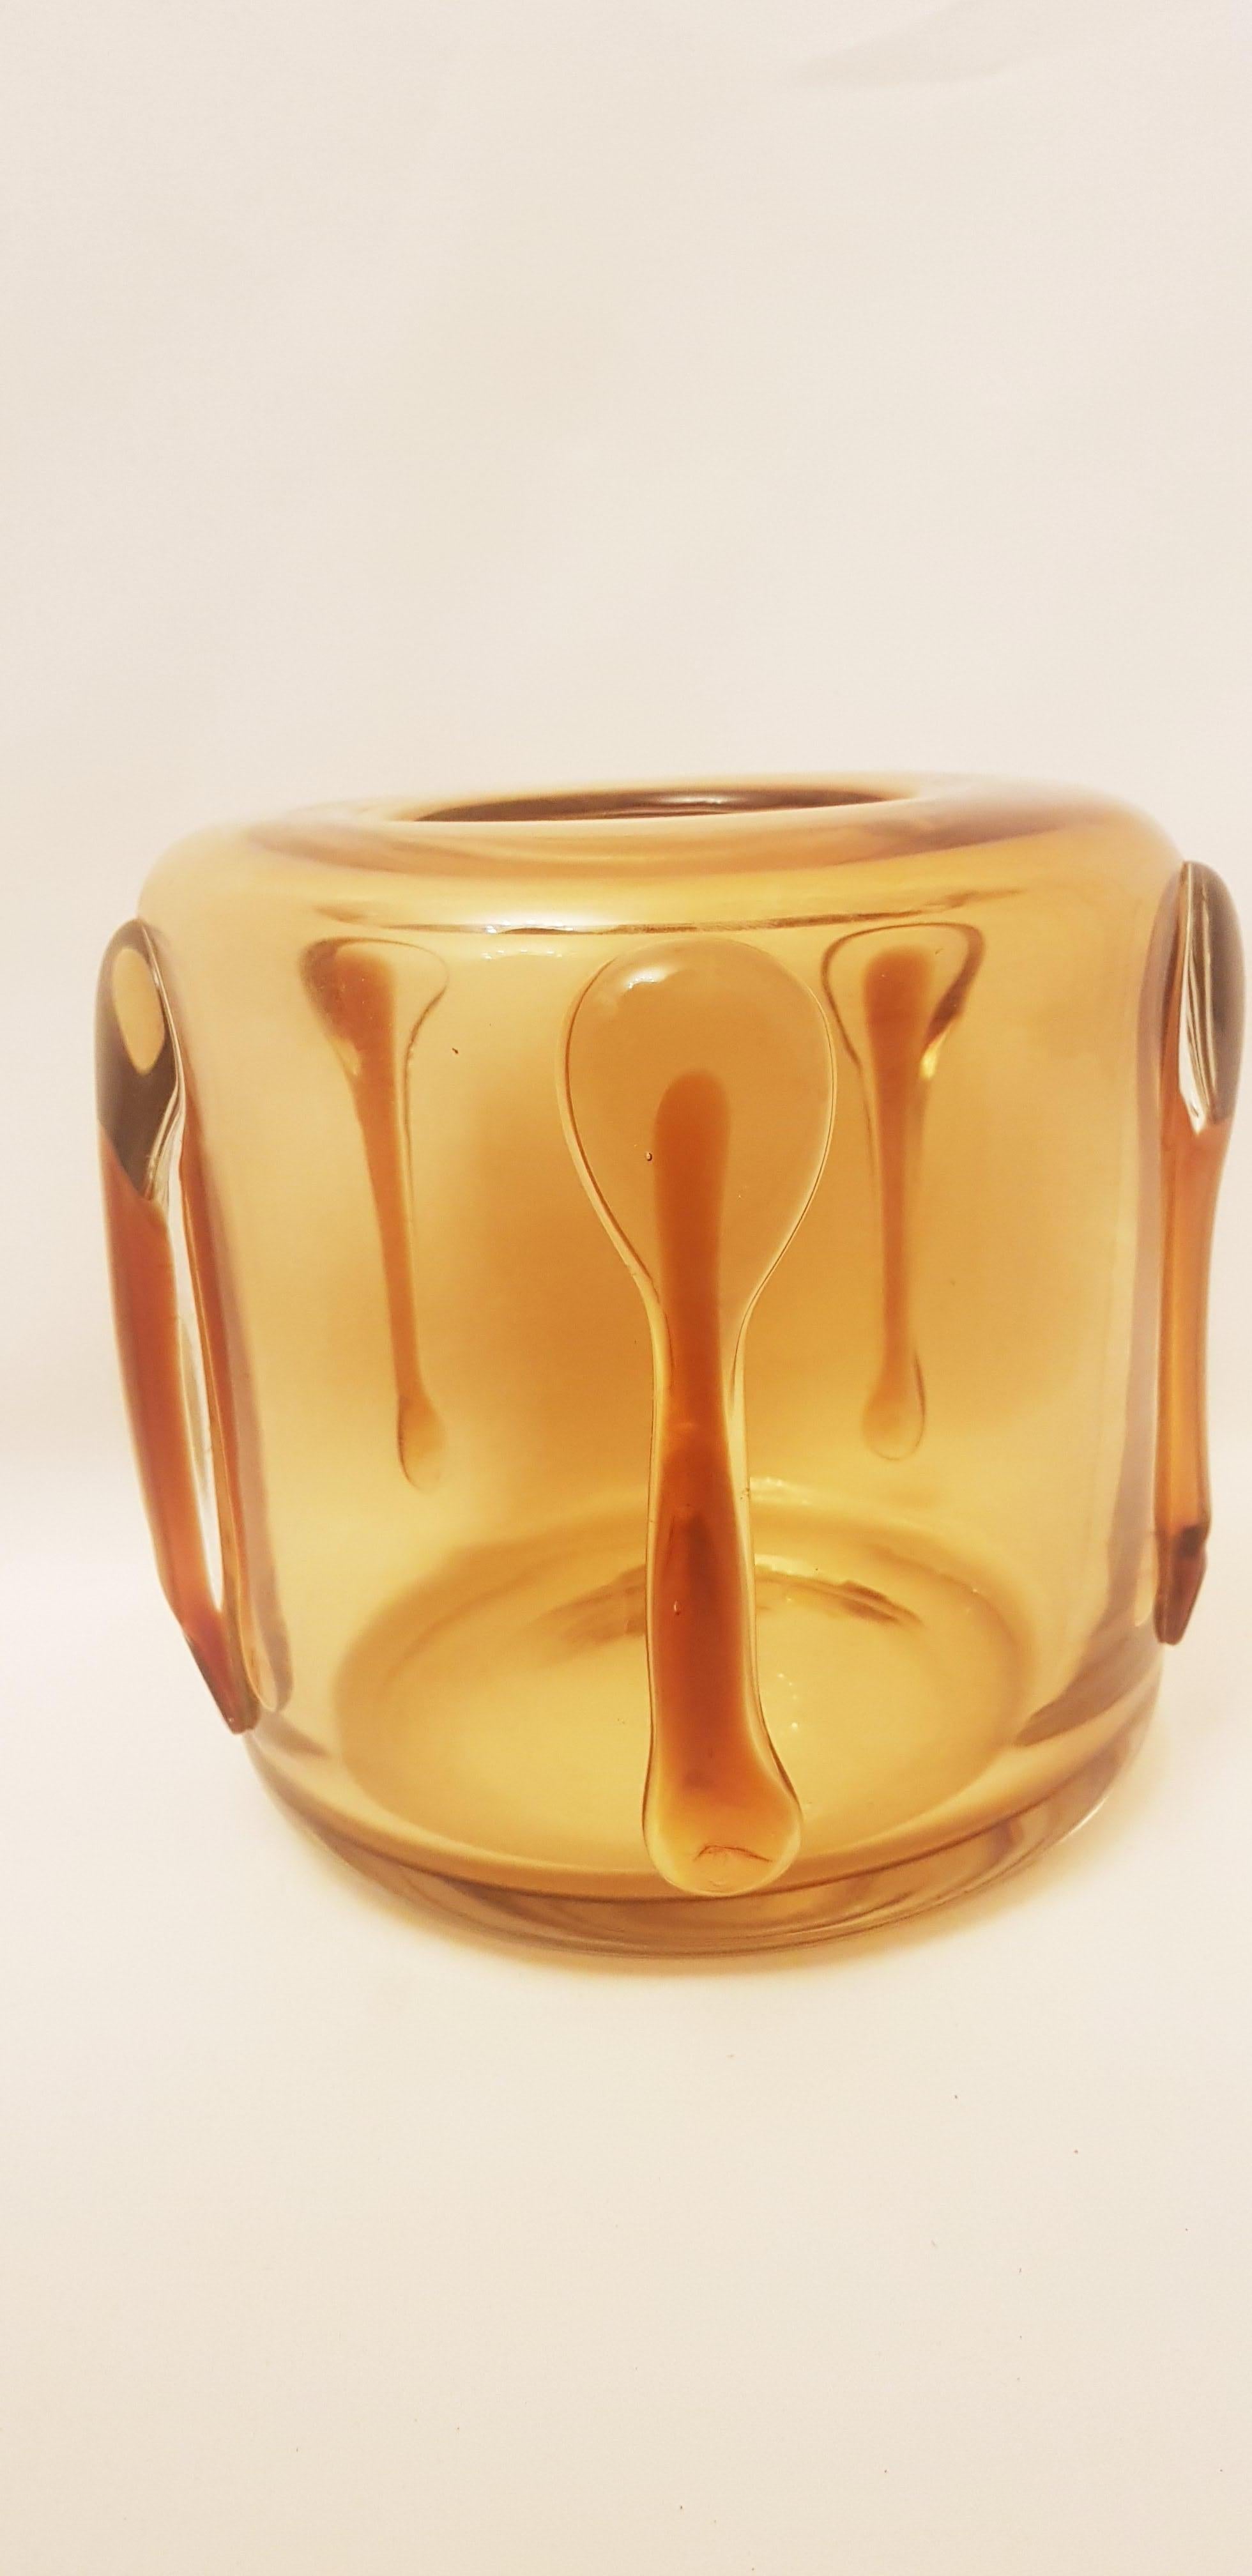 Beautiful large Murano glass bowl in amber and brown, attributed to Vittorio Zecchin for Vetri Venini; years 1920-1929. In excellent condition.